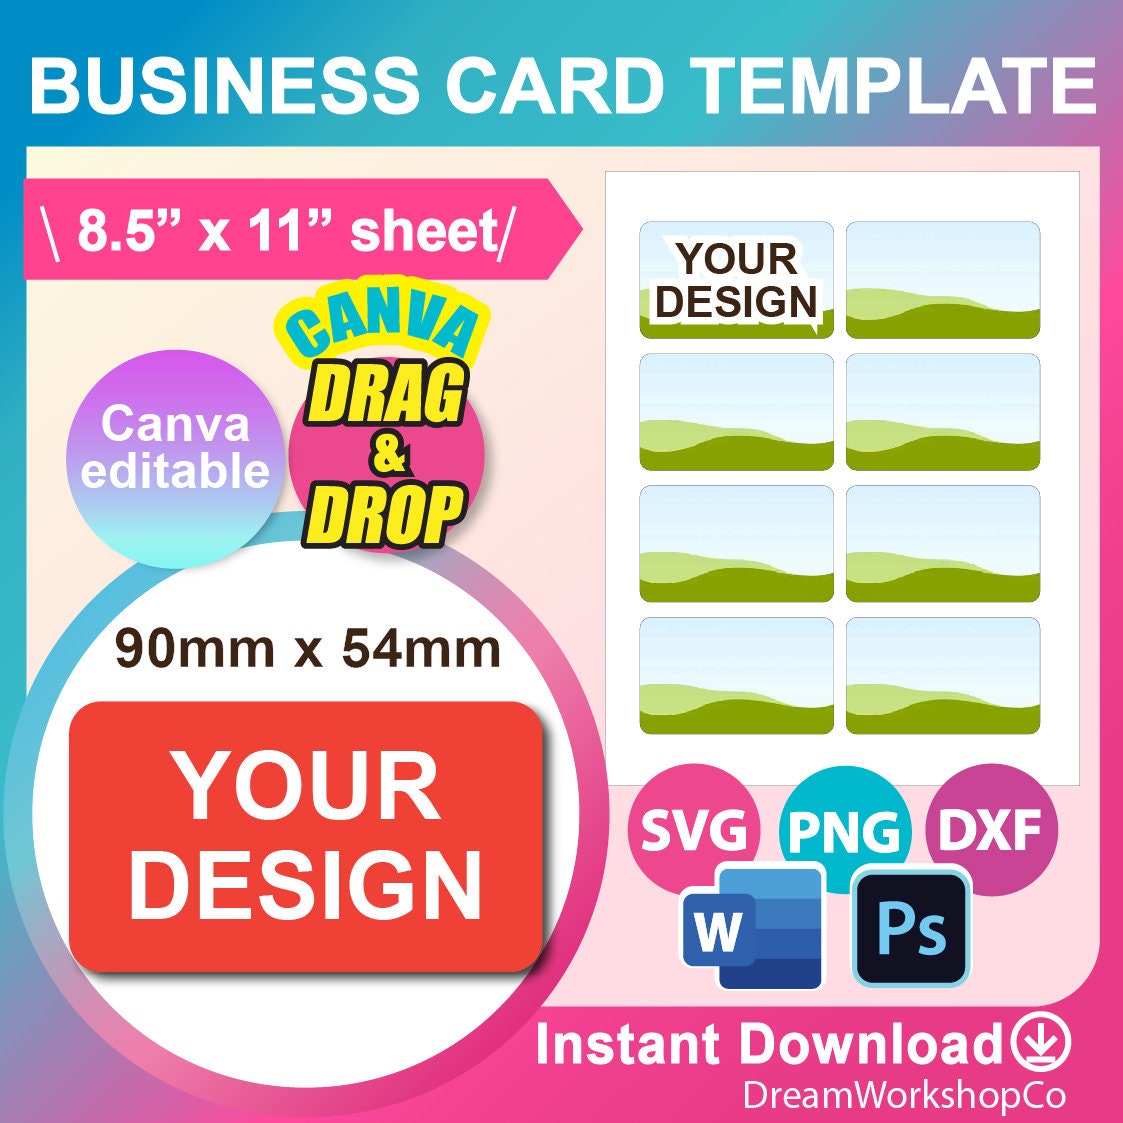 Business Card Template, SVG, DXF, Canva, Ms Word Docx, Png, Psd, 8.5x11  Sheet, Printable, Instant Download -  Denmark